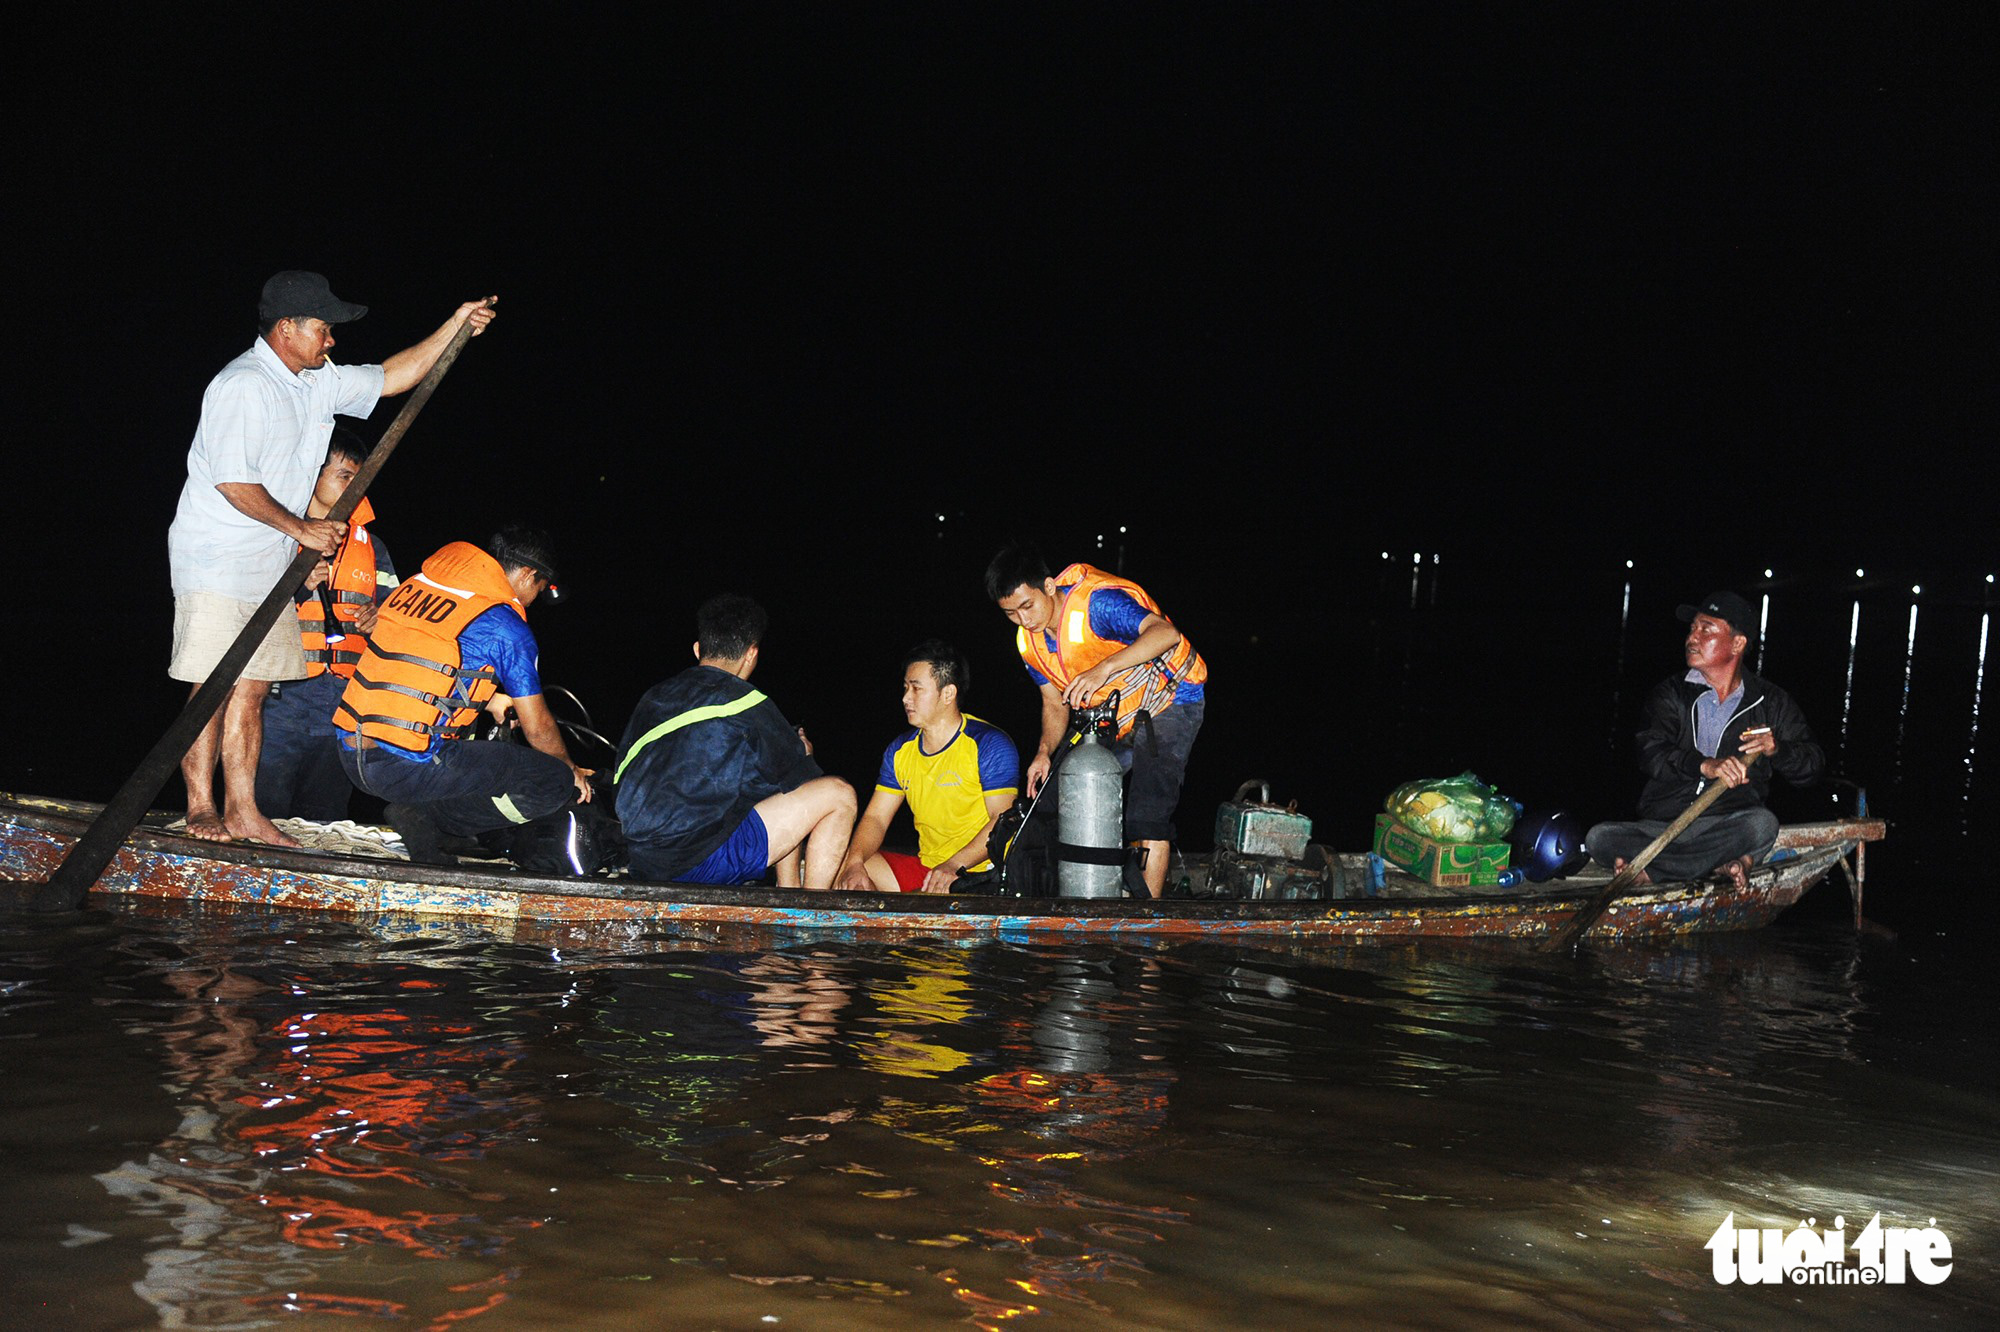 Six relatives drown as wherry capsizes in central Vietnam